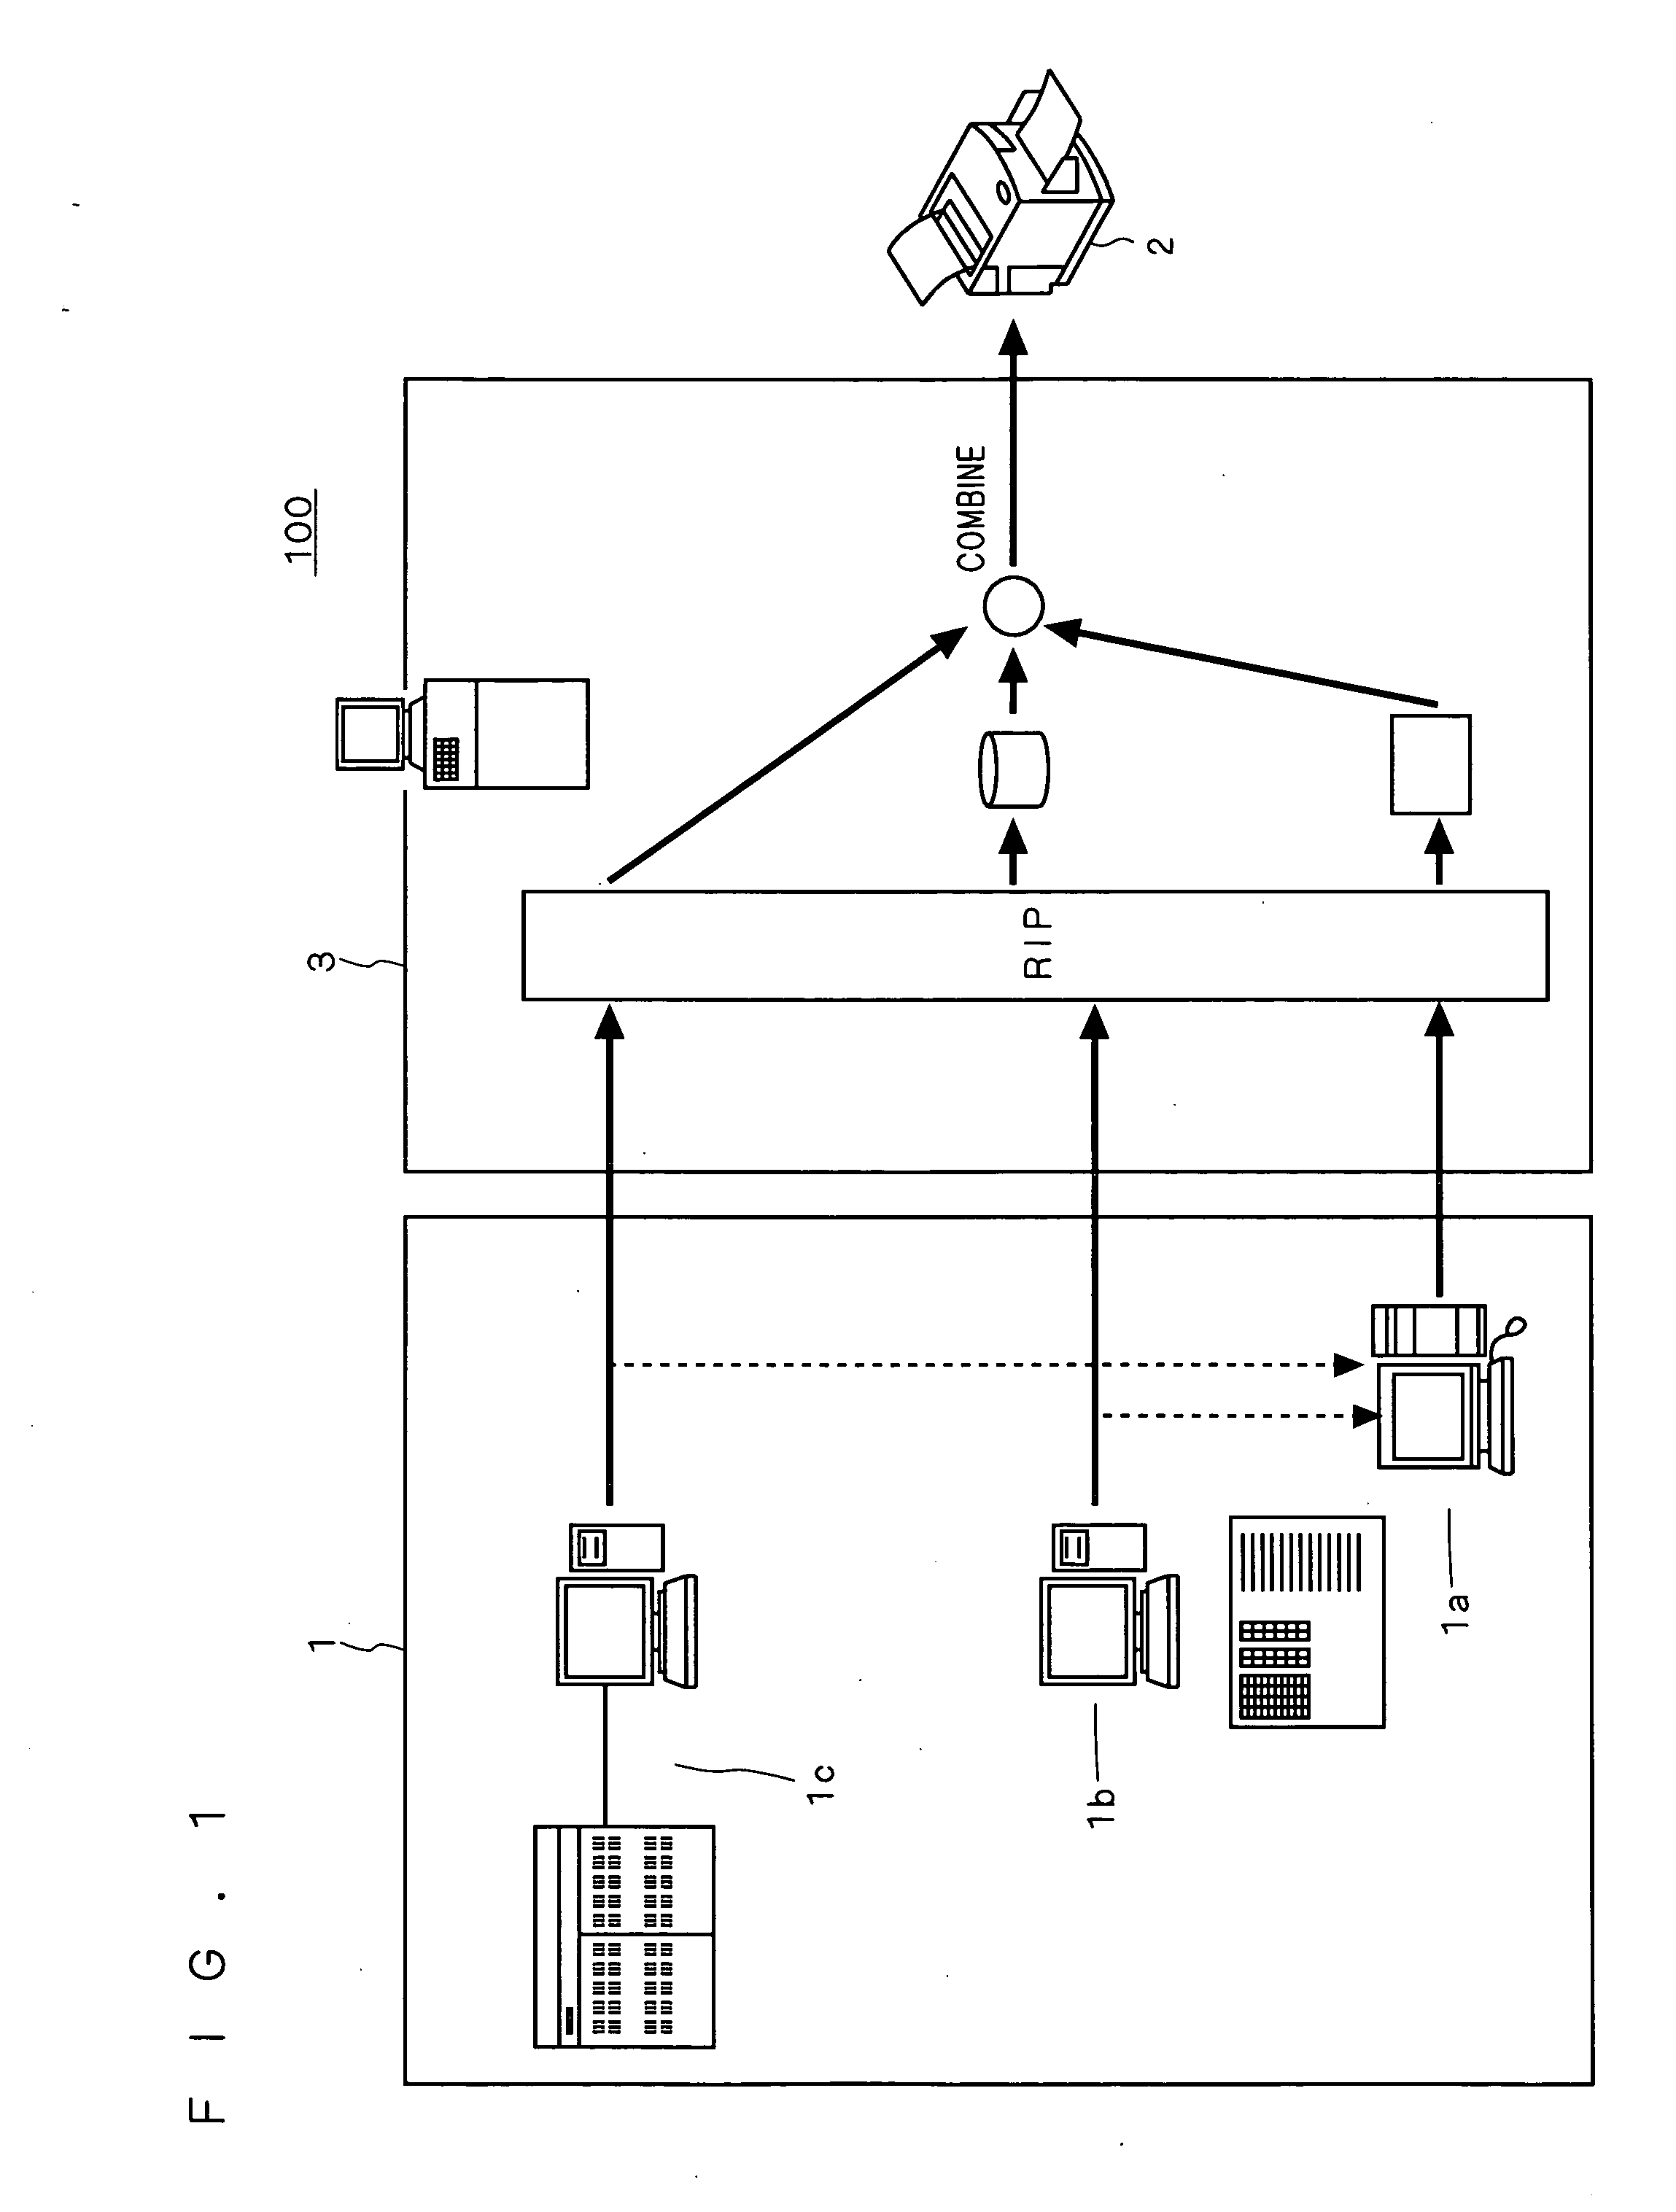 Printing system, controller for printing apparatus, method of executing printing process, and program